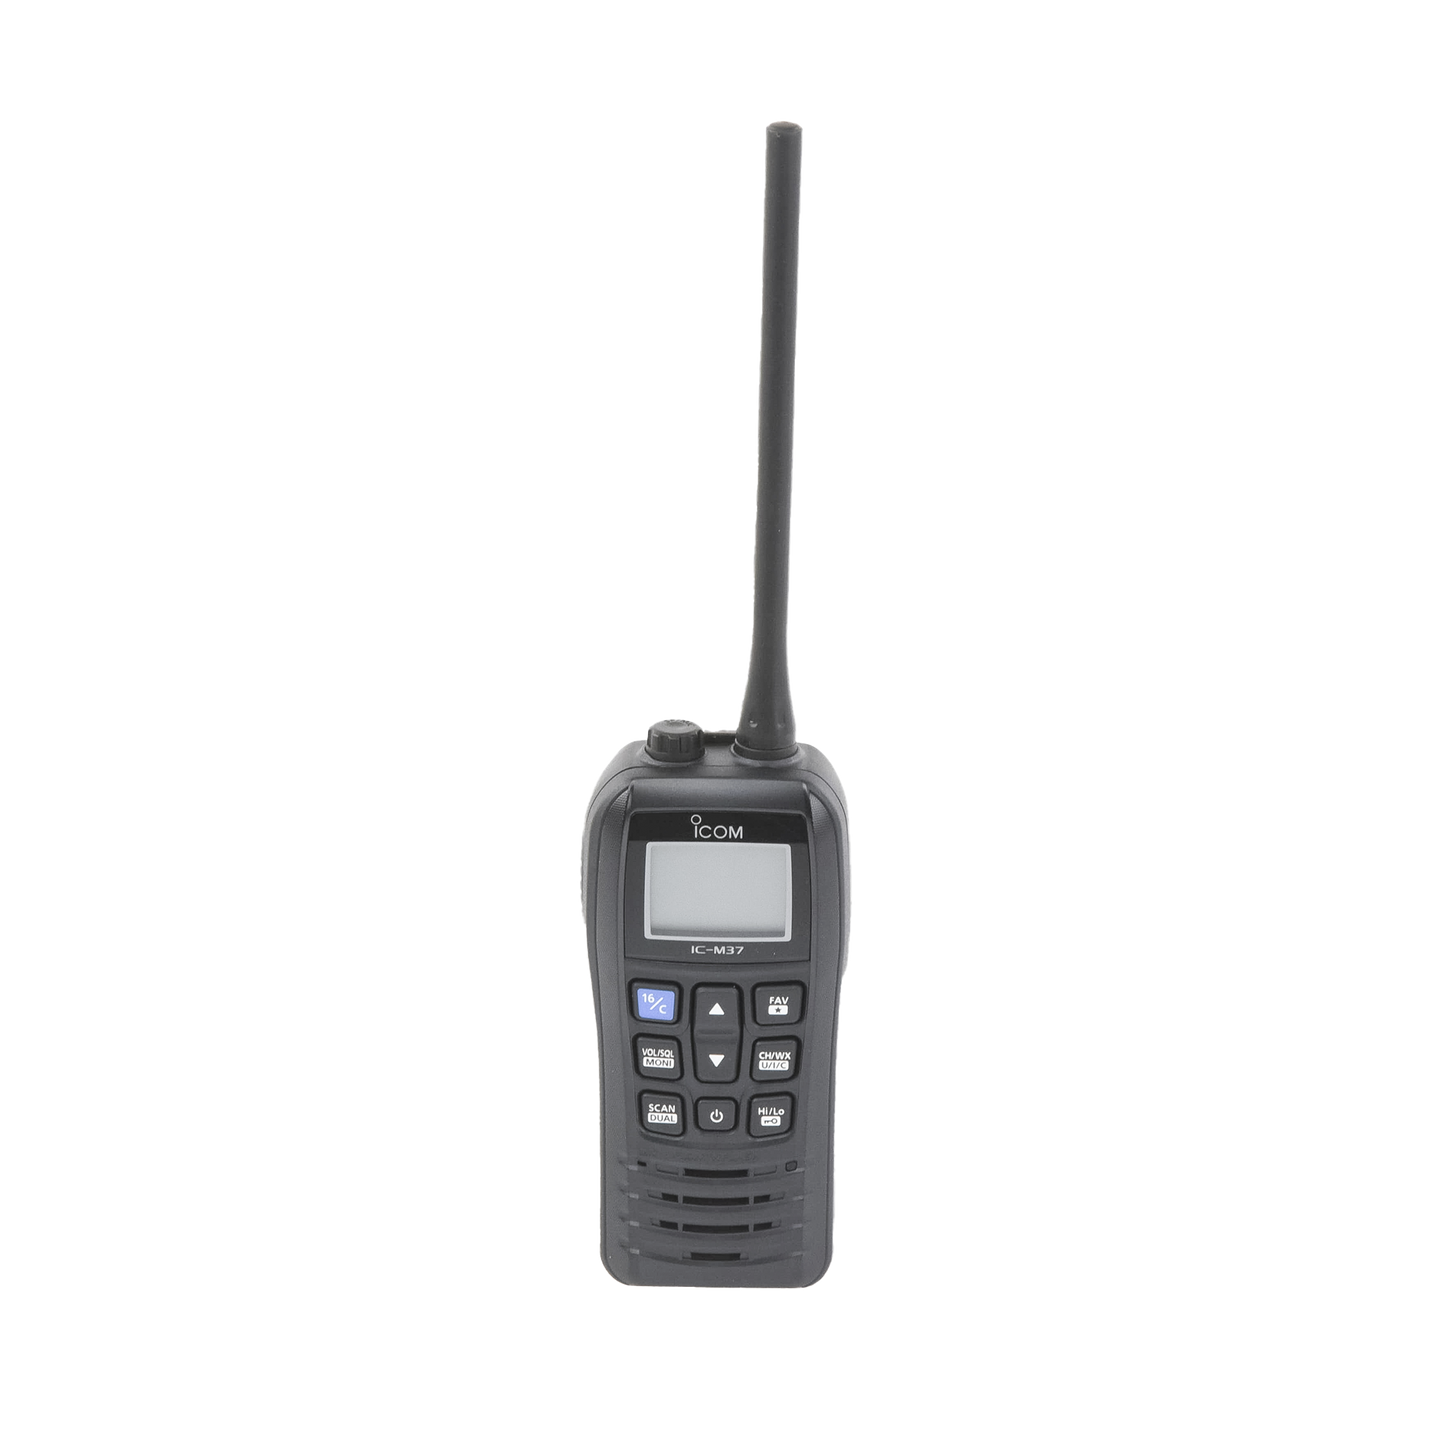 VHF Marine Portable Transceiver, Large Keys and Easy-to-Grip Design, 6 W, 12 Hours of Battery Life (with BP-296 battery), Channel History Function Stores the Last Five Channels, Used for Easy Recall, Float and Flash Function, Stylish Design, Black.